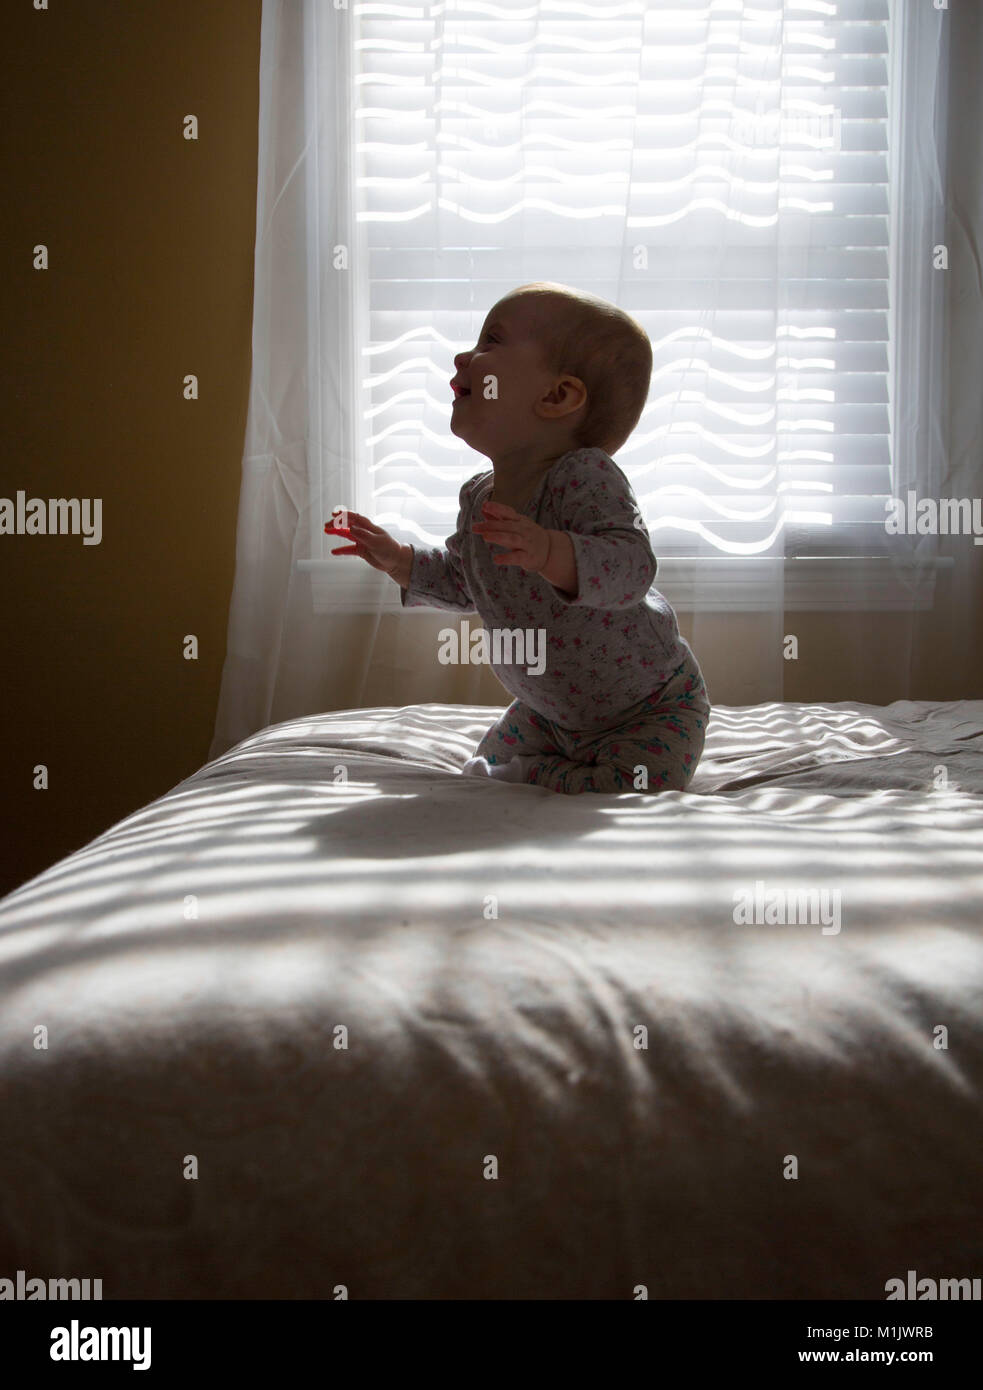 Profile of Laughing Baby Kneeling on Bed Stock Photo